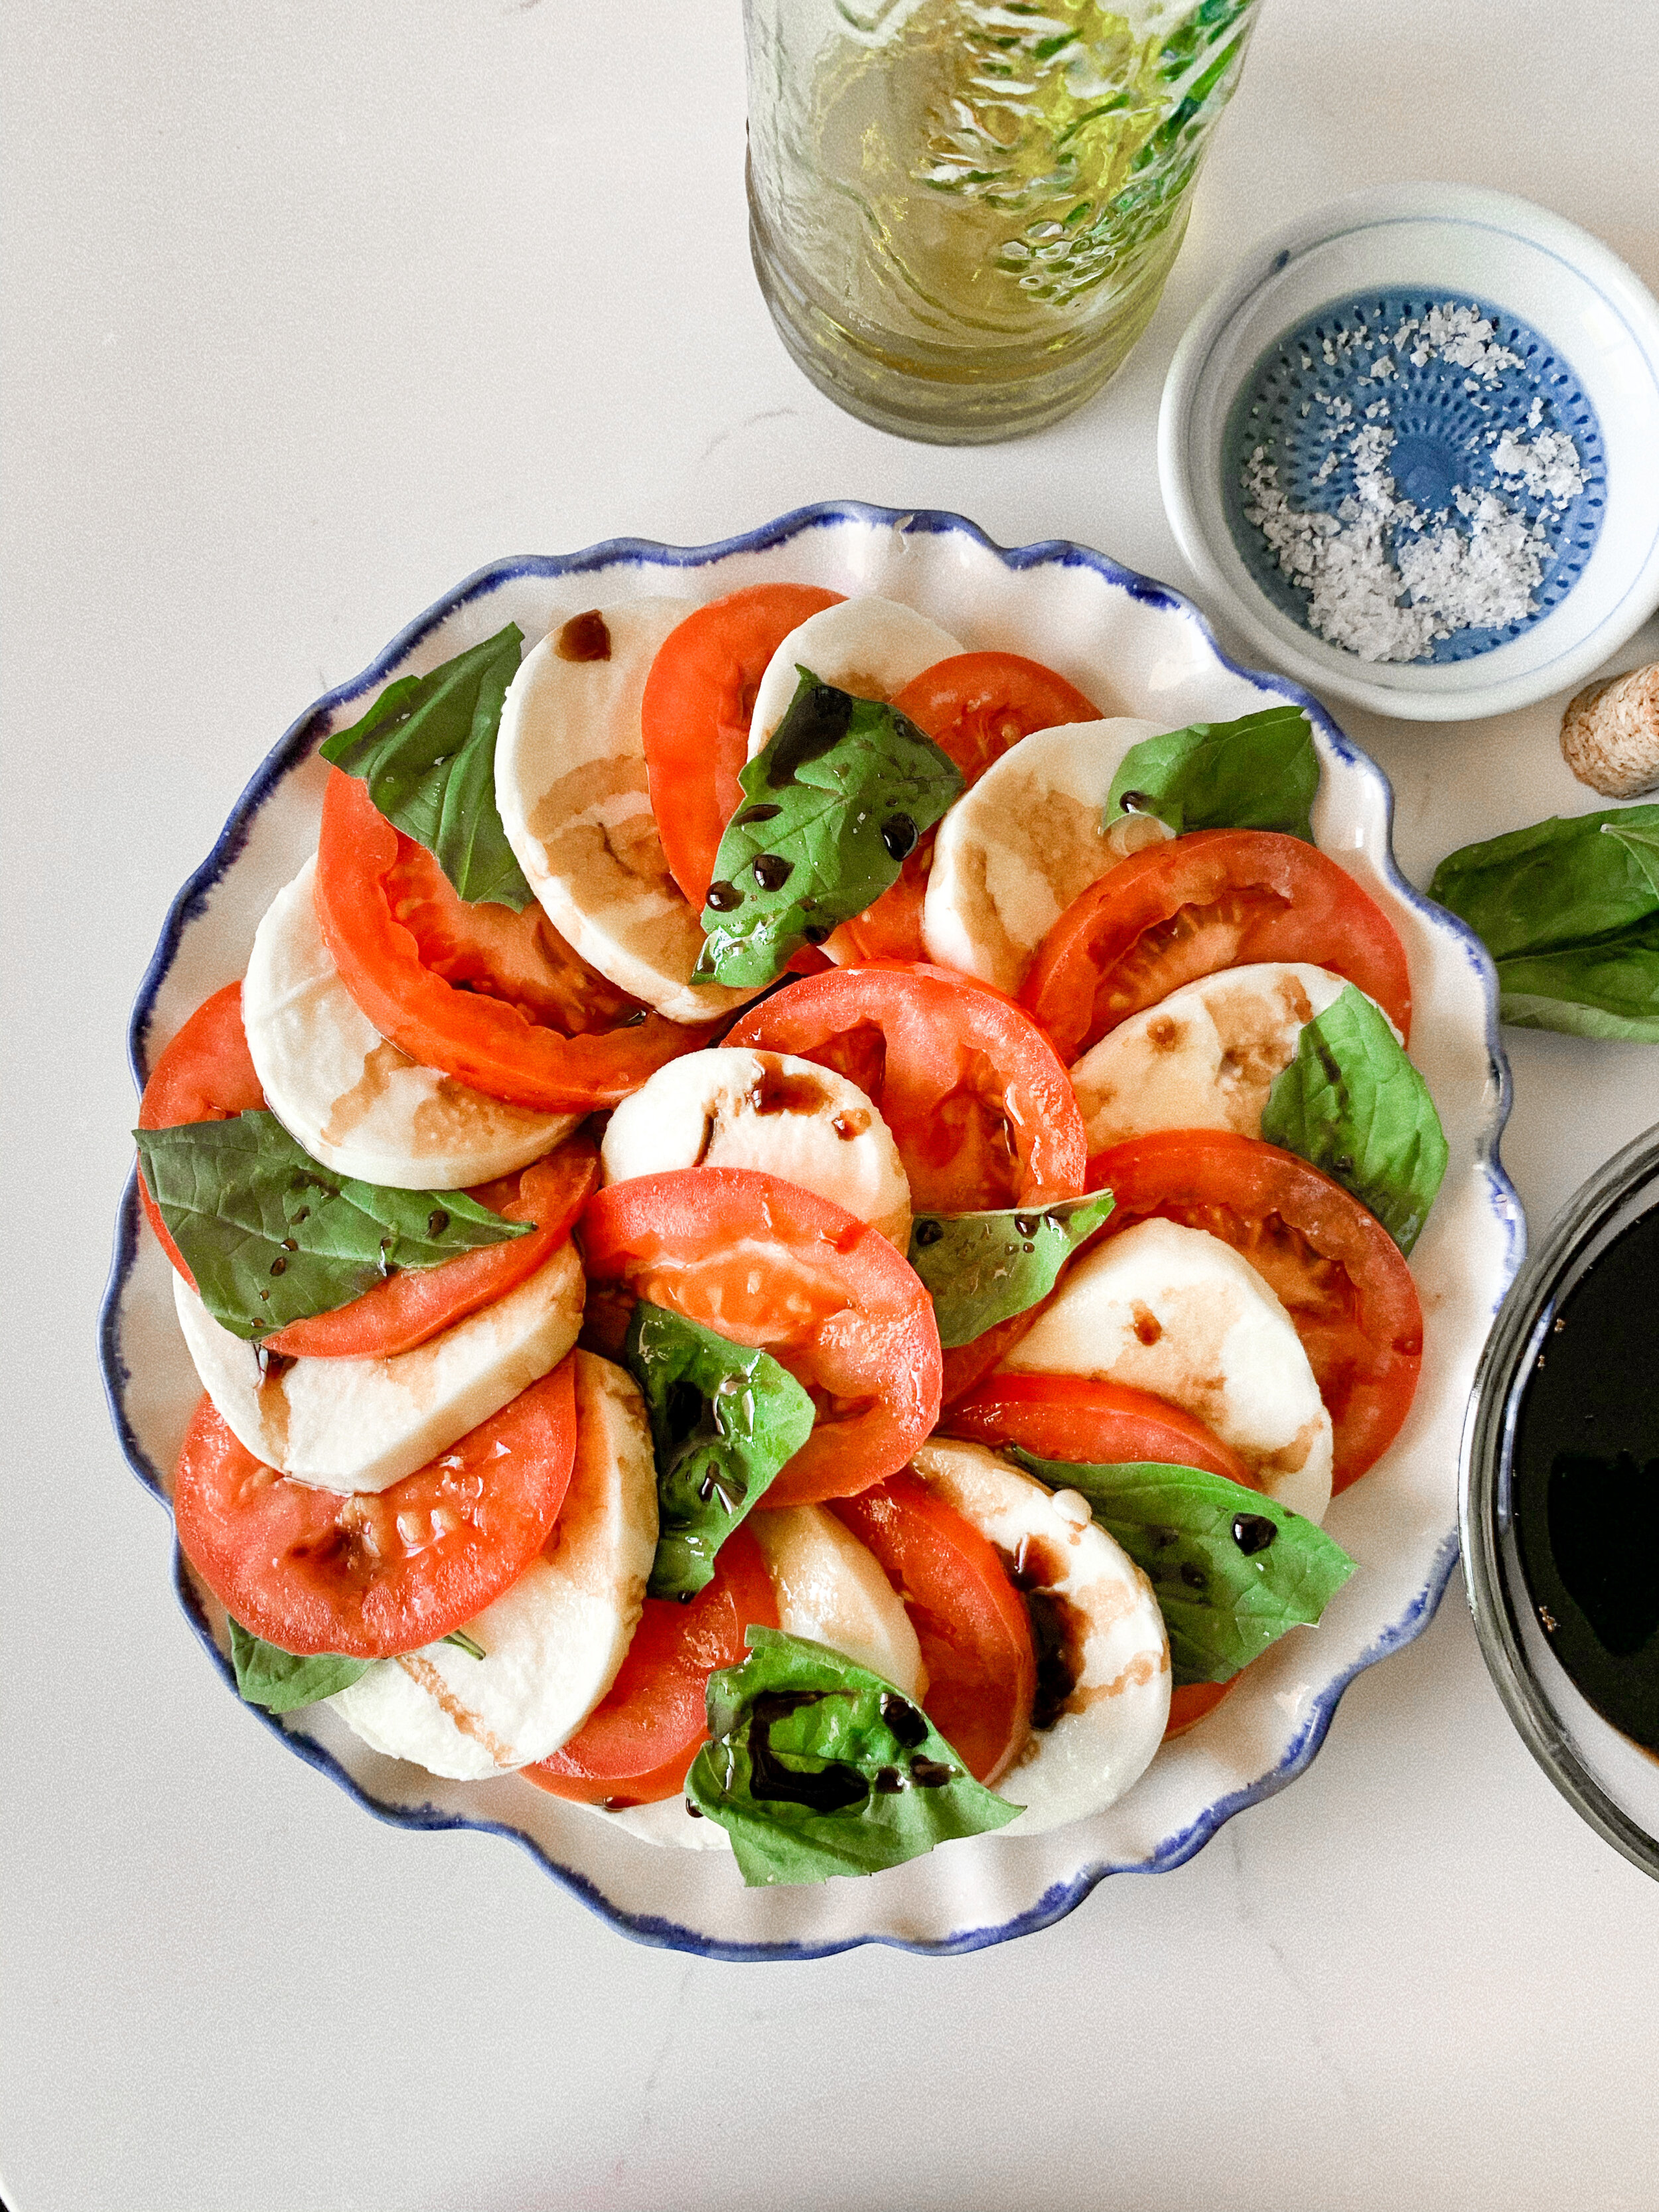 The prepped and plated caprese salad with homemade balsamic glaze